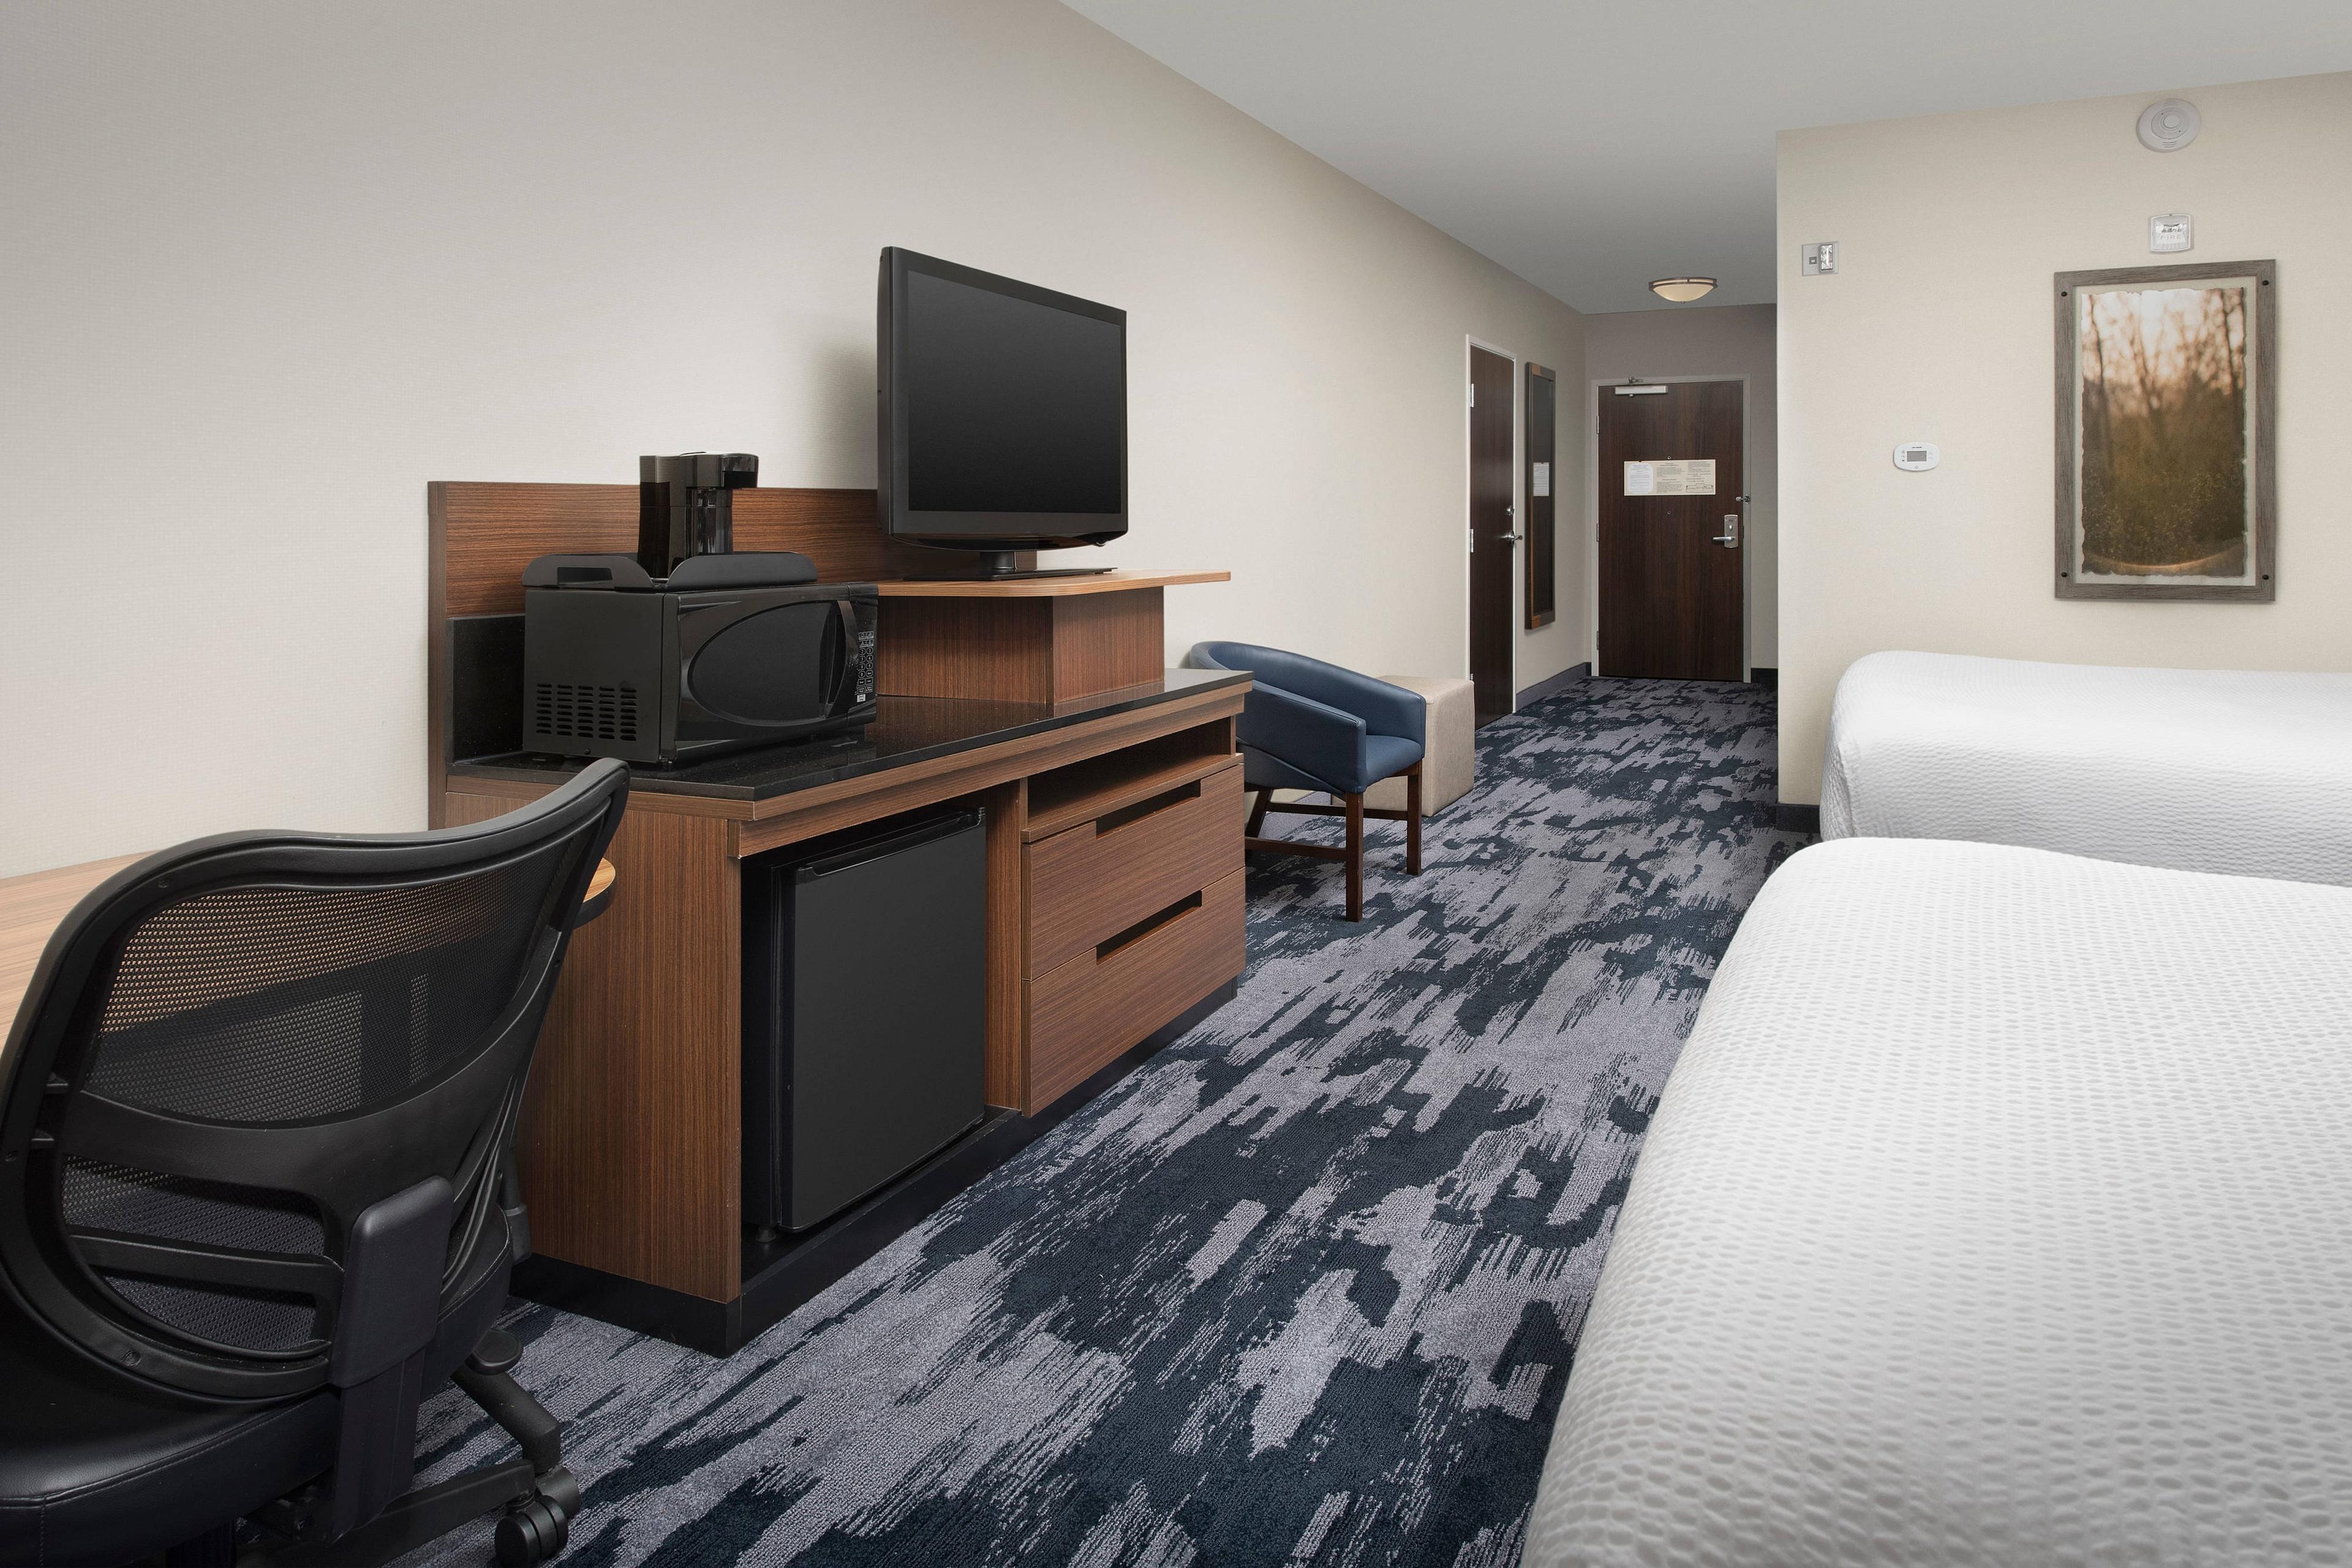 Guests will enjoy the extra space offered and free WiFi in our accessible guest rooms.